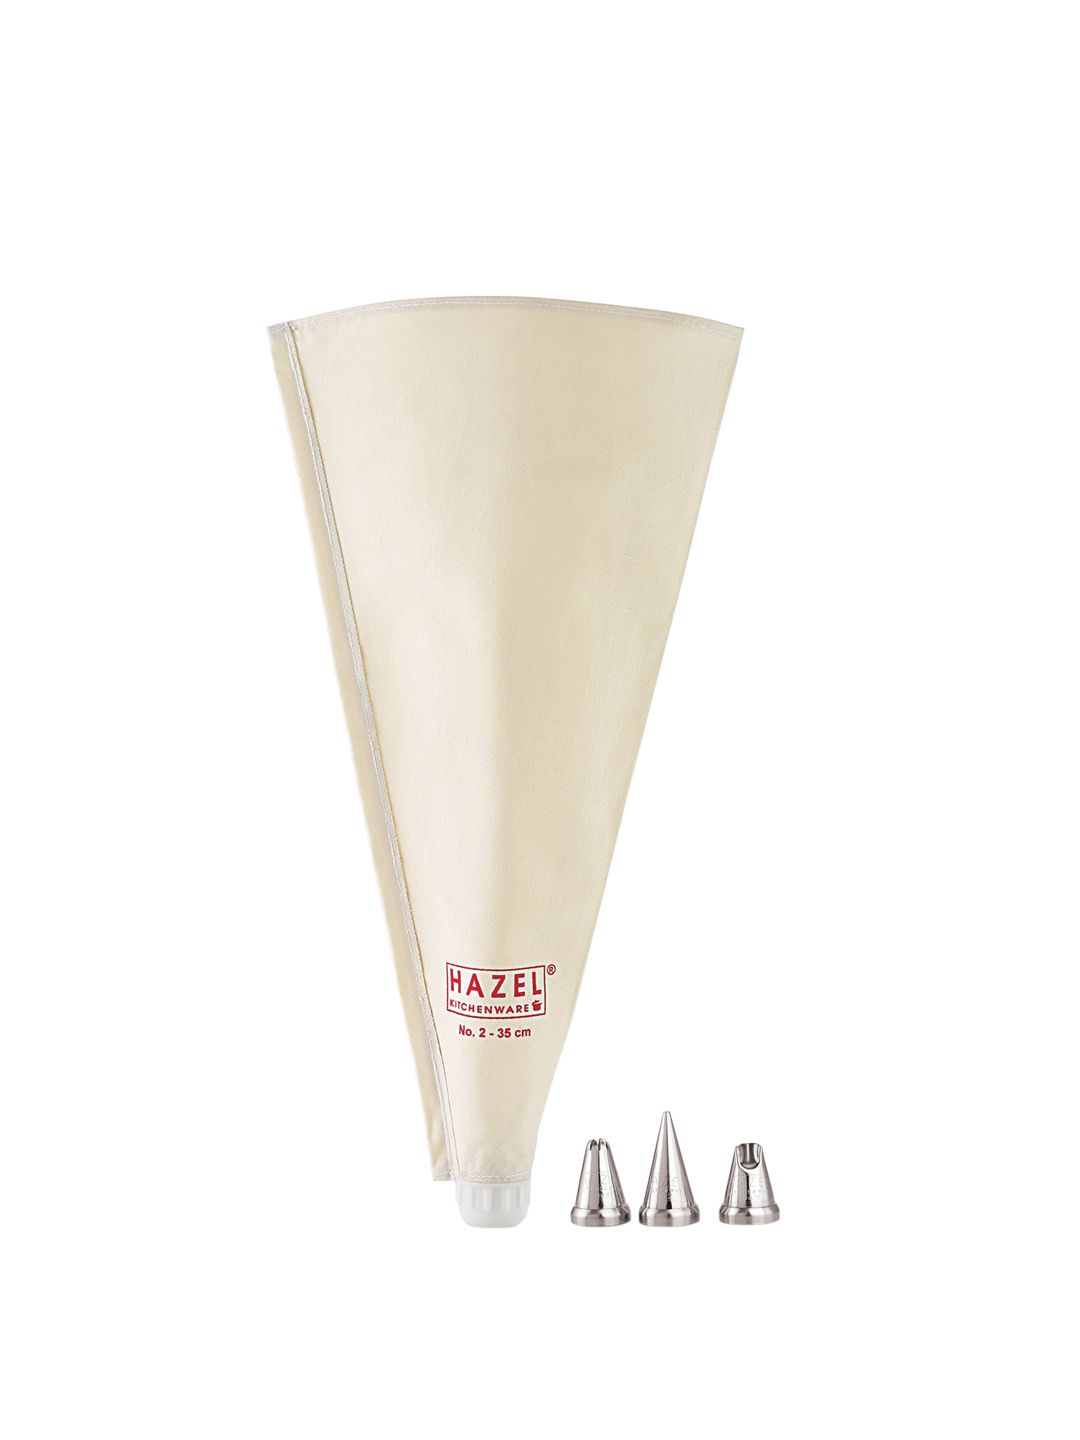 HAZEL White & Silver-Toned Cotton Piping Bag With 3 Nozzles Price in India